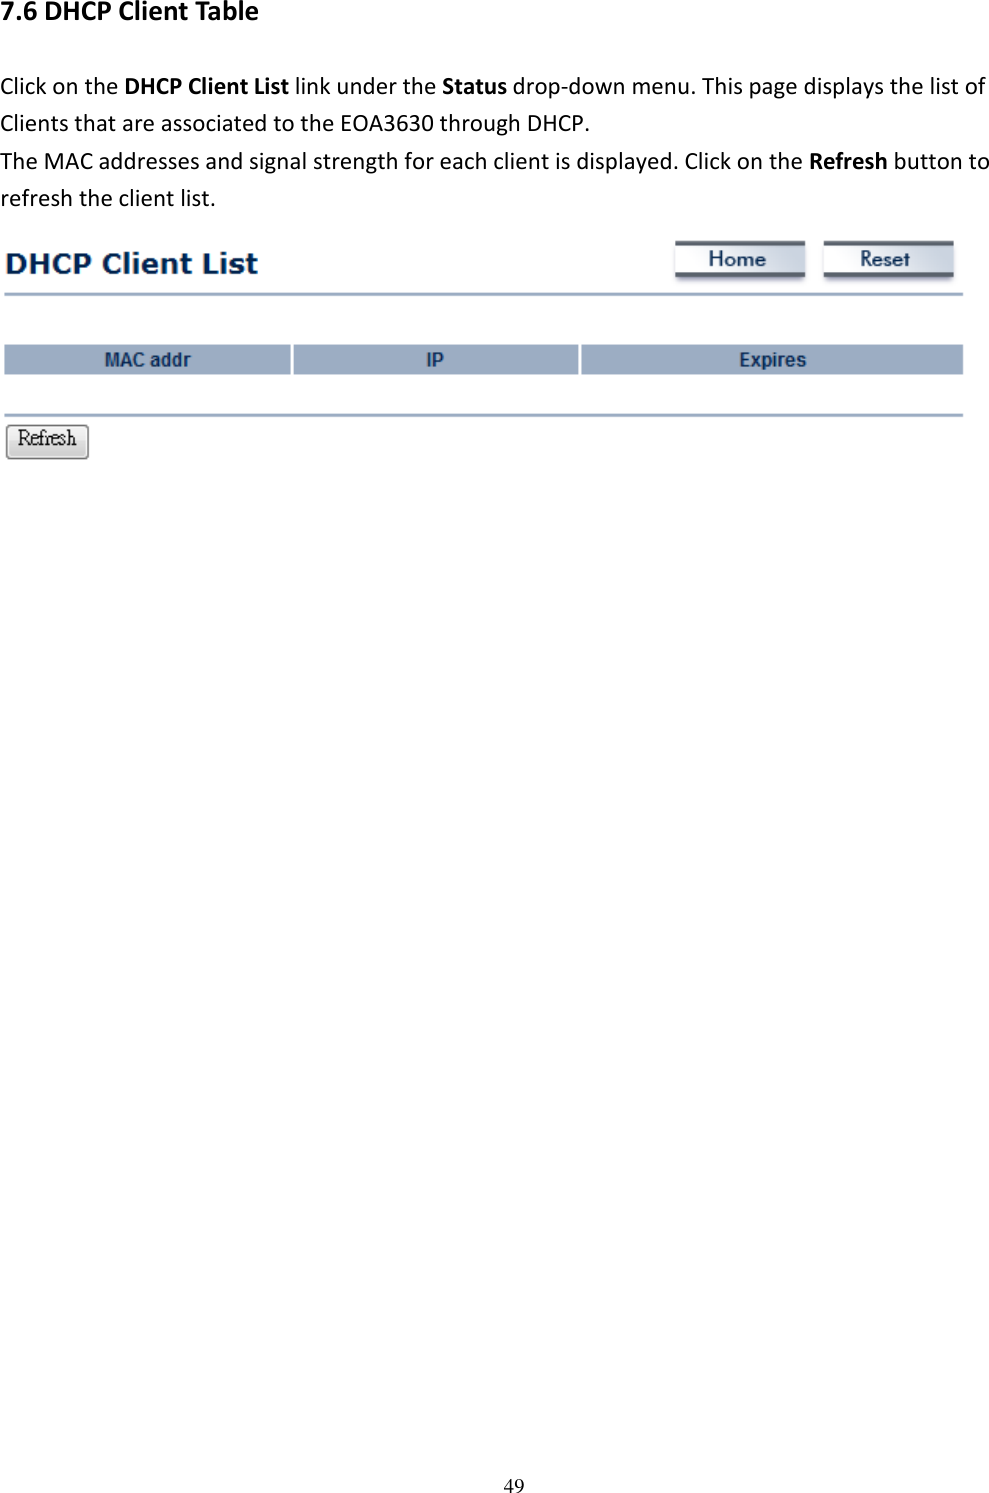   497.6 DHCP Client Table Click on the DHCP Client List link under the Status drop-down menu. This page displays the list of Clients that are associated to the EOA3630 through DHCP. The MAC addresses and signal strength for each client is displayed. Click on the Refresh button to refresh the client list.                           